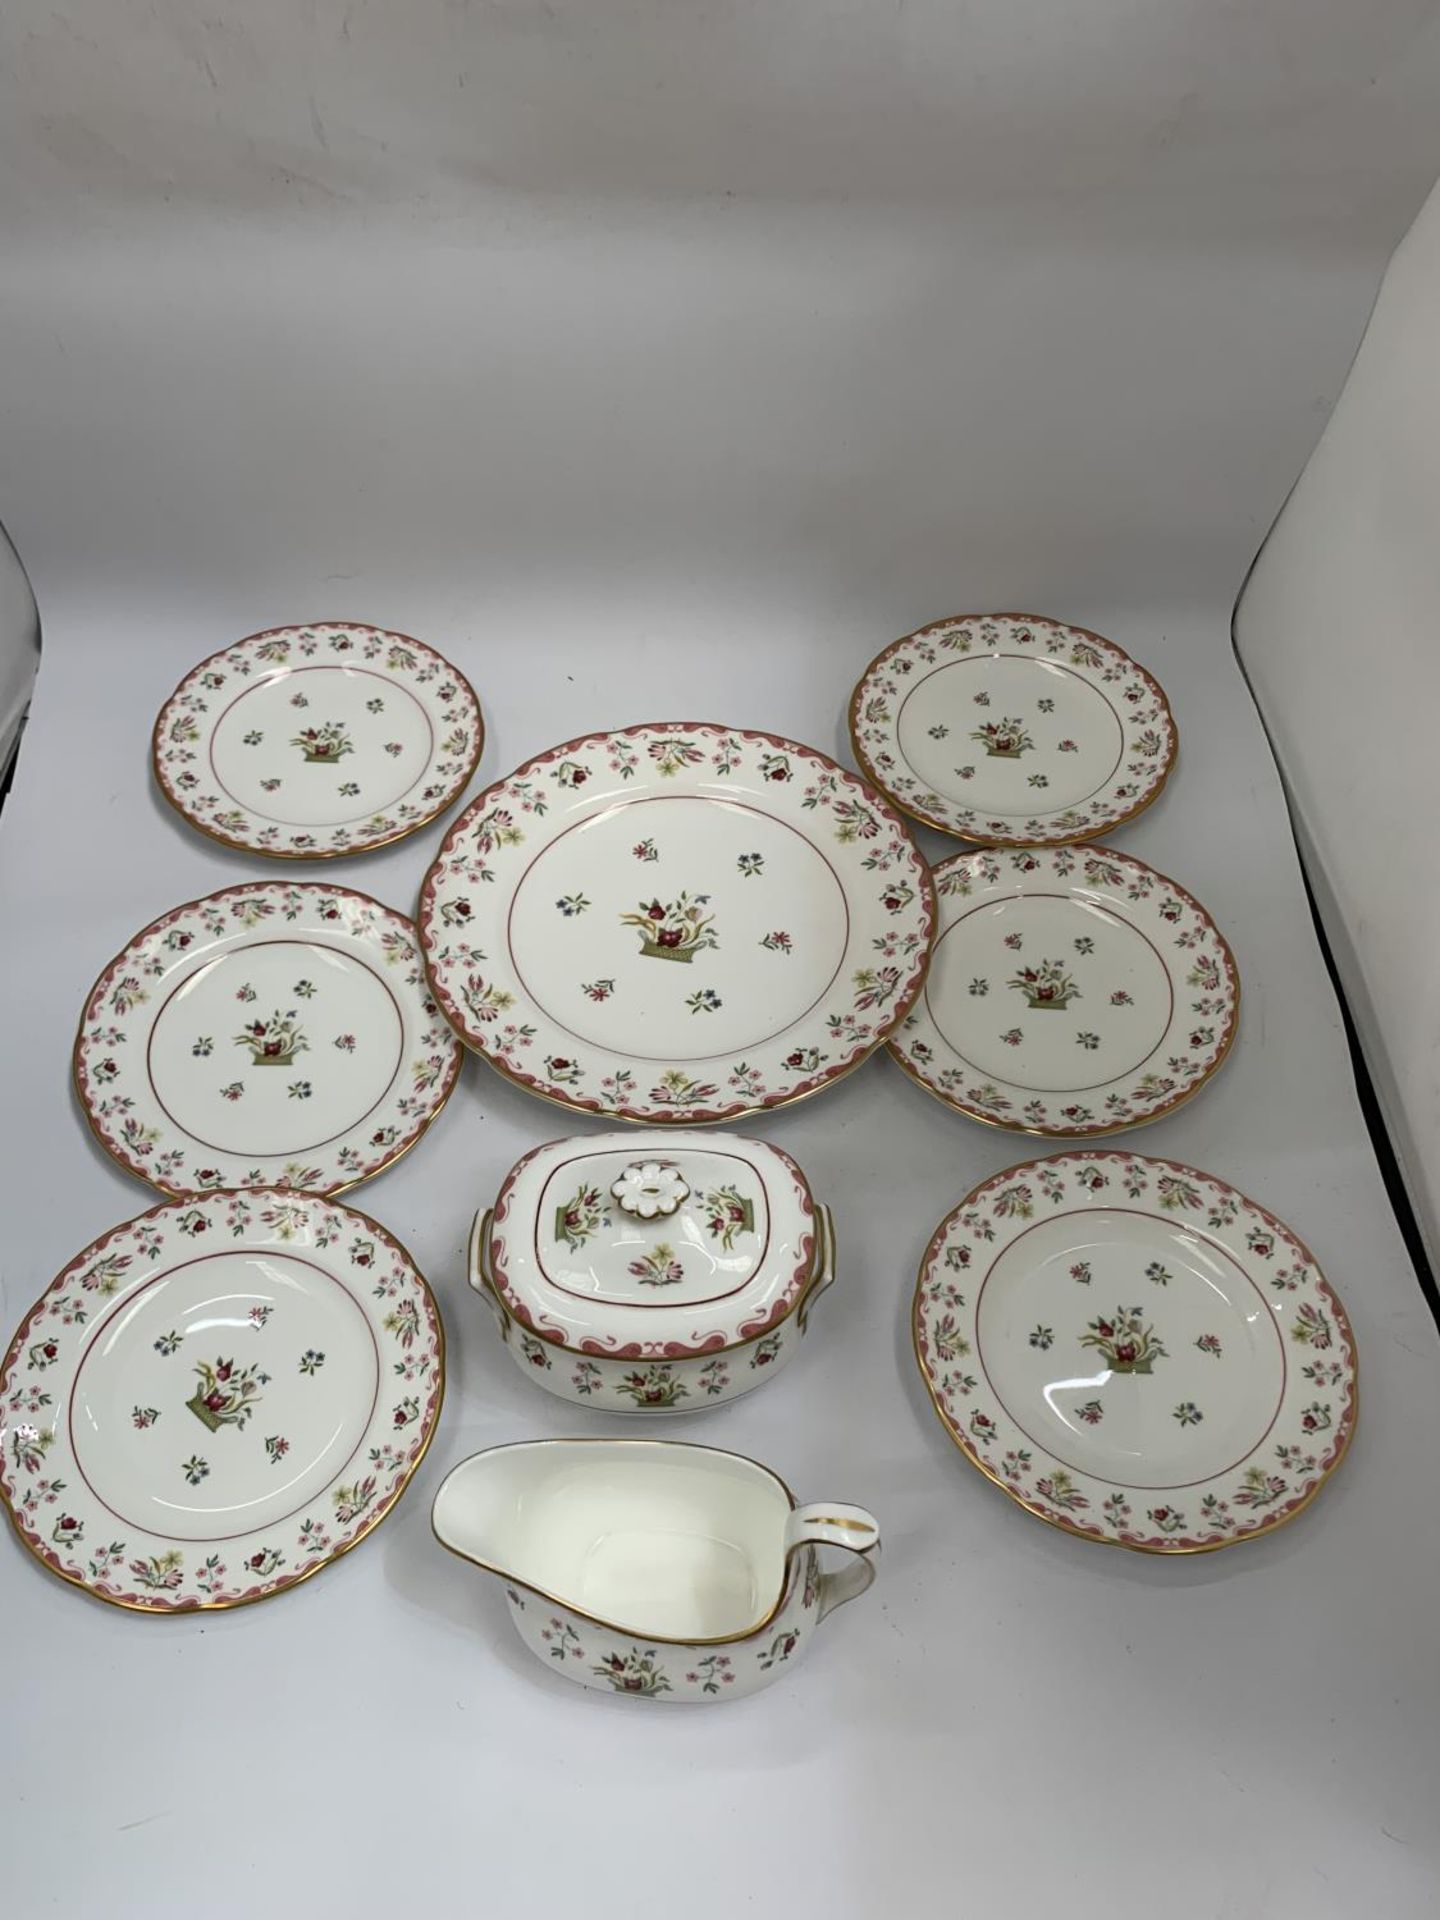 A QUANTITY OF WEDGWOOD 'BIANCA' TO INCLUDE A CAKE PLATE, SIDE PLATES, CREAM JUG AND SUGAR BOWL